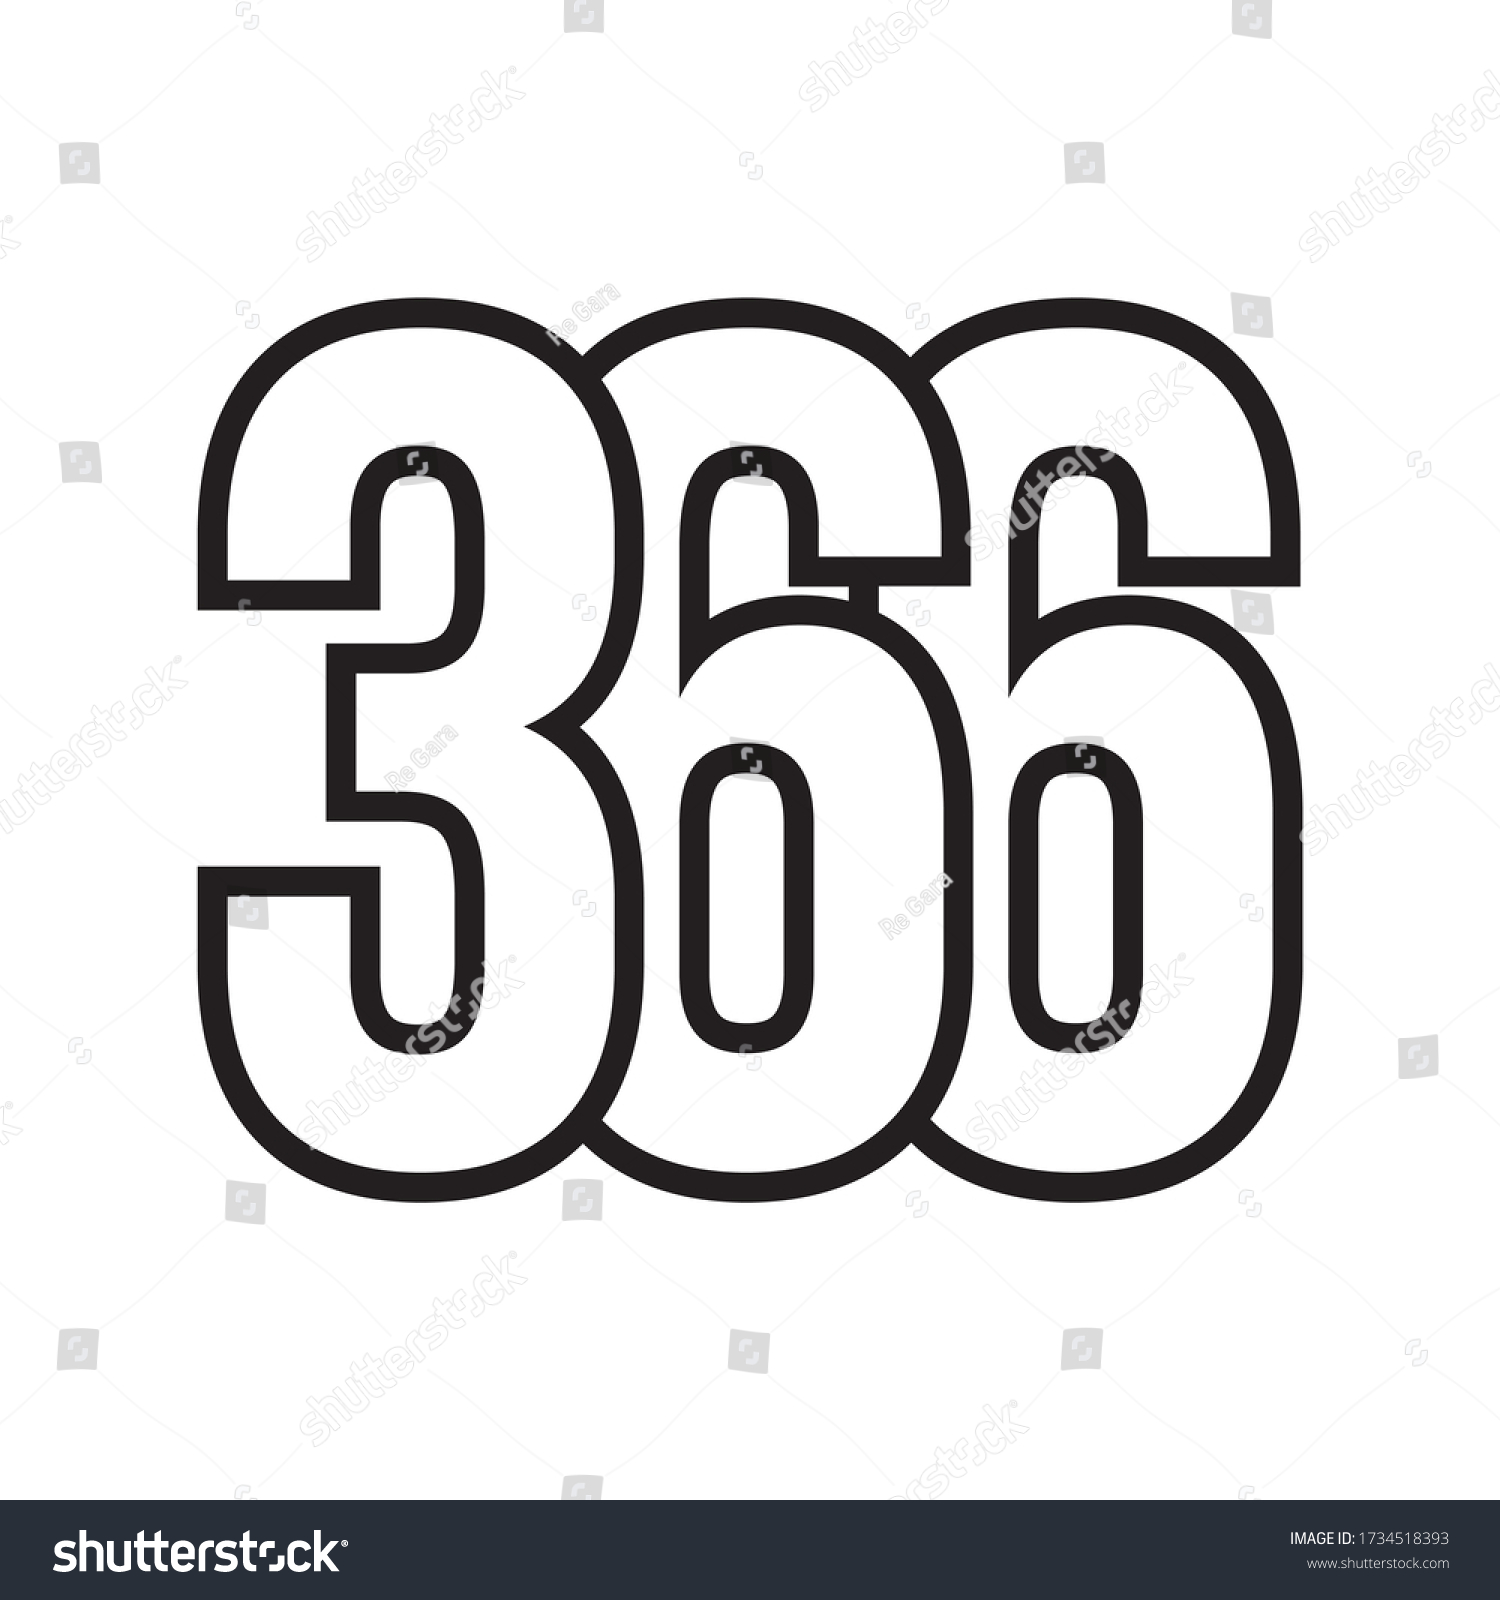 366 Day Leap Year 2024 Design Stock Vector (Royalty Free) 1734518393